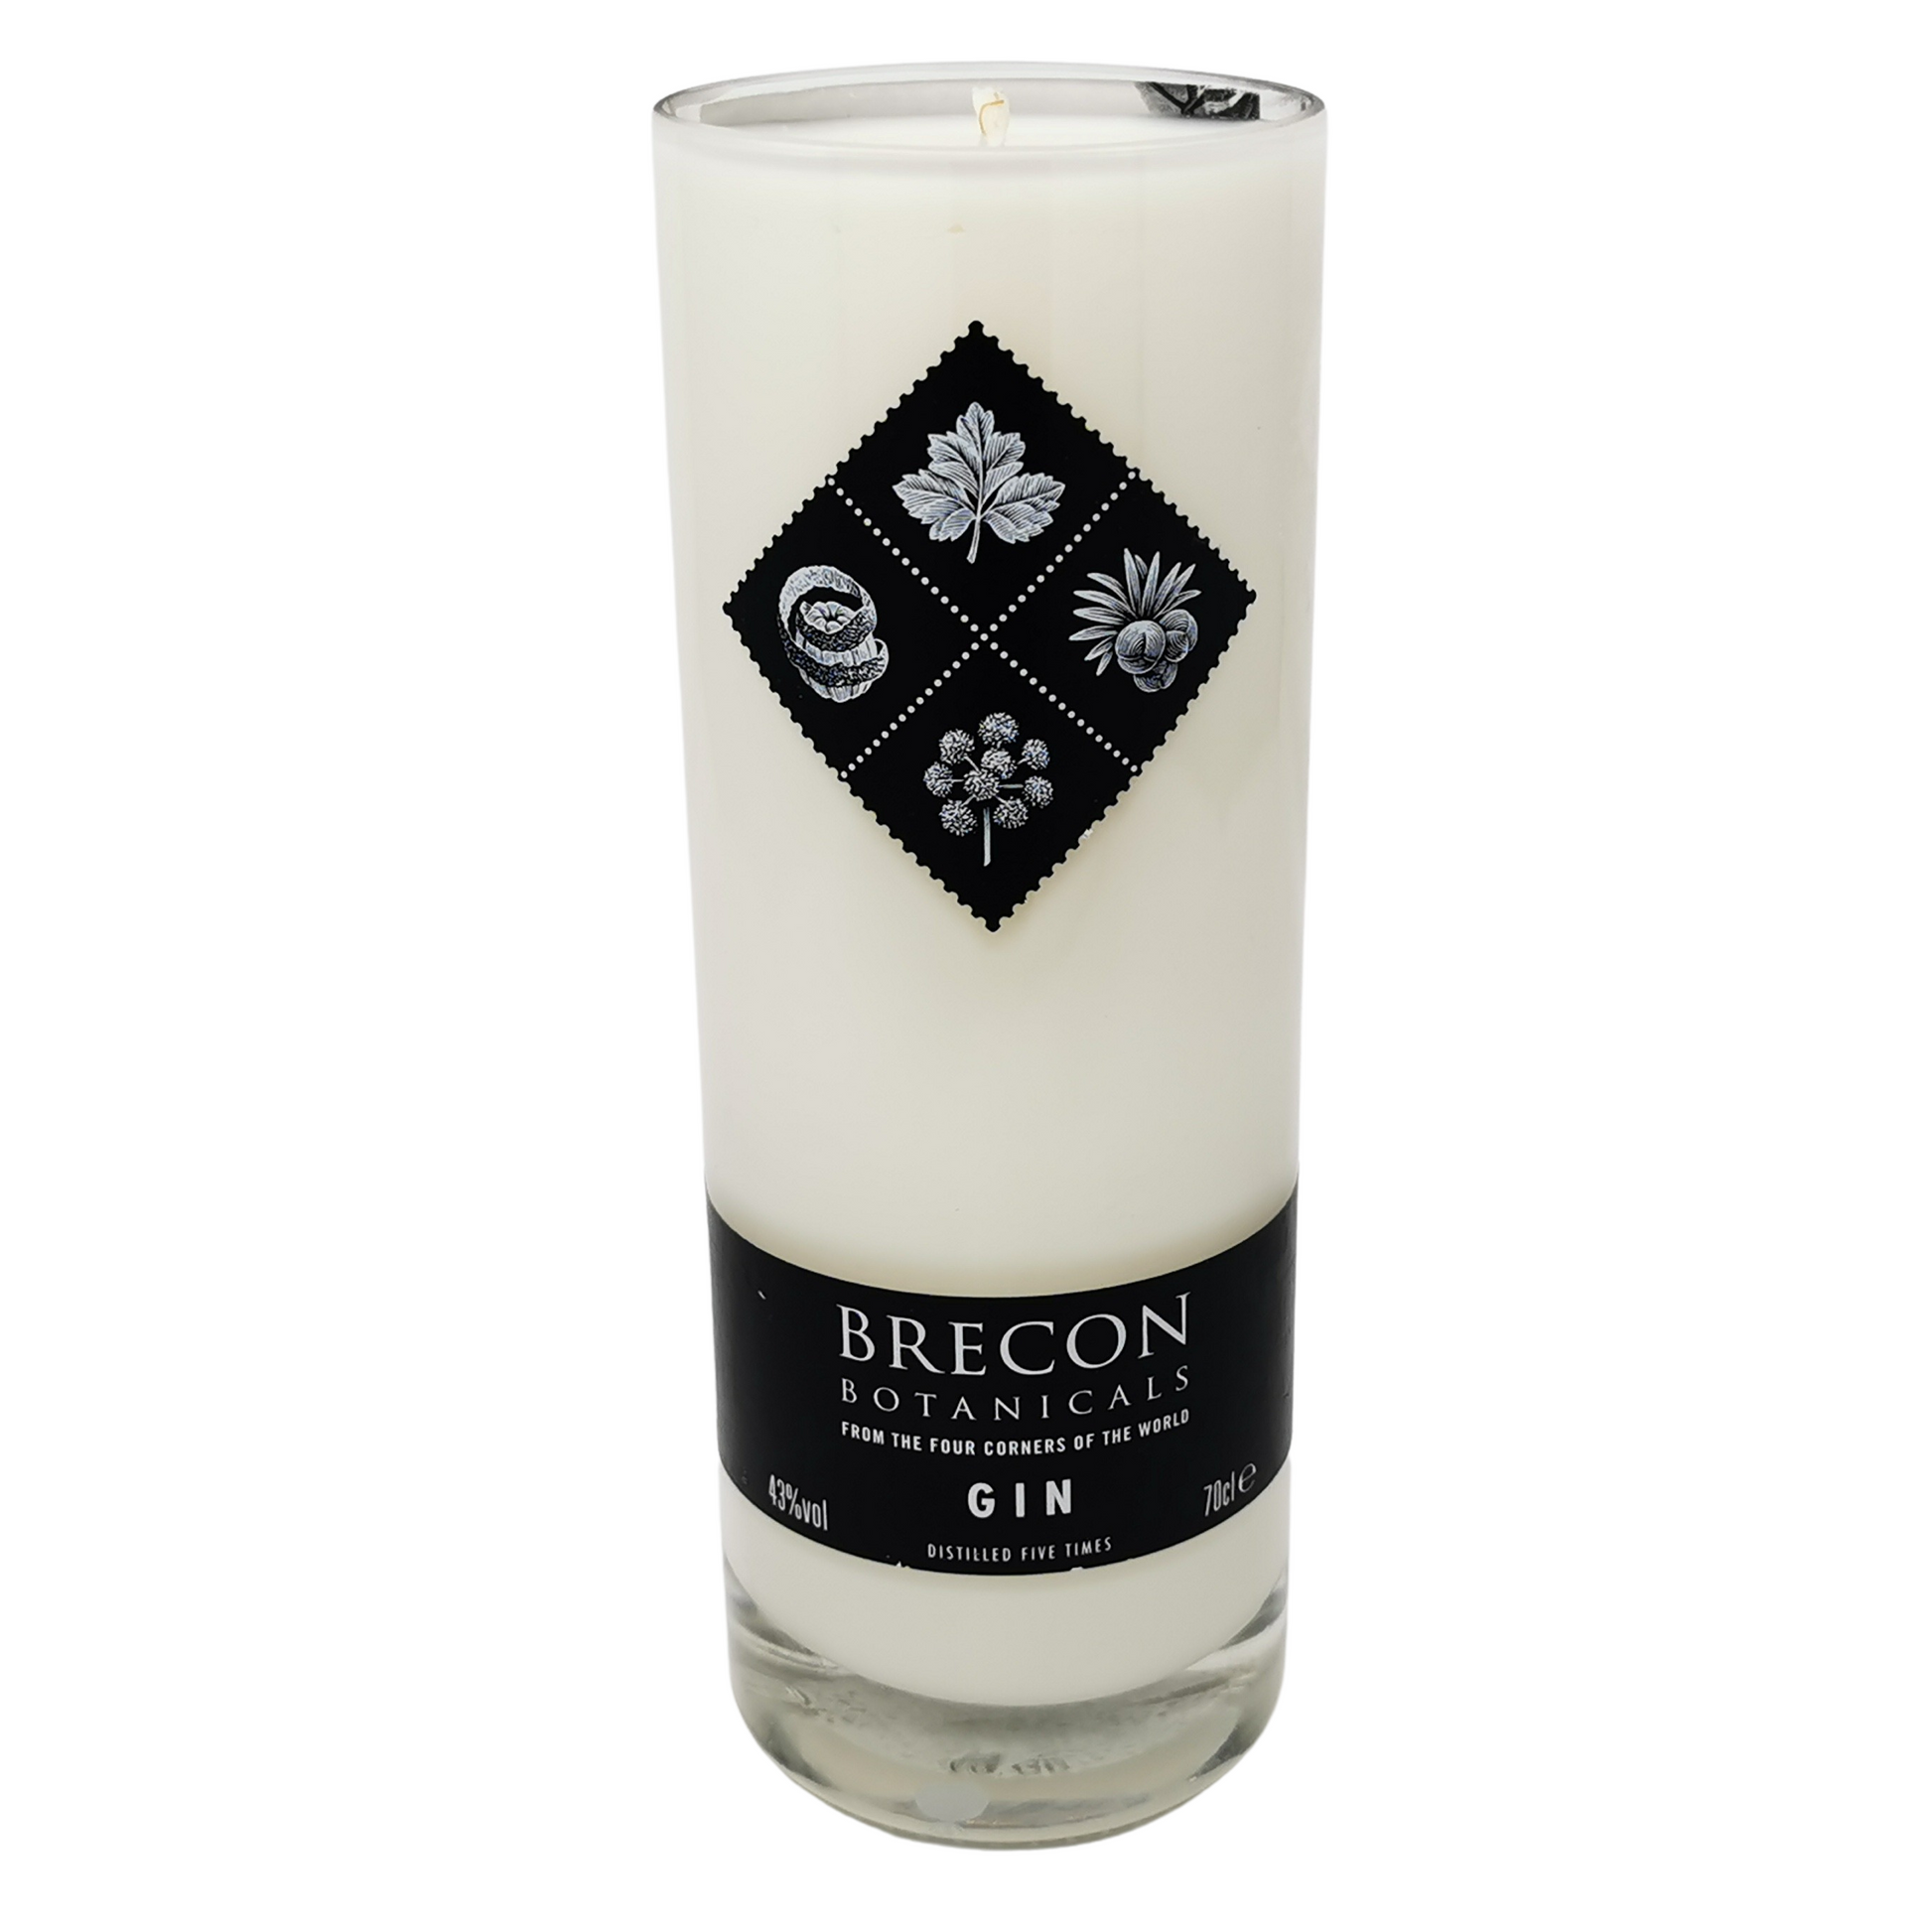 Brecon Gin Bottle Candle Gin Bottle Candles Adhock Homeware